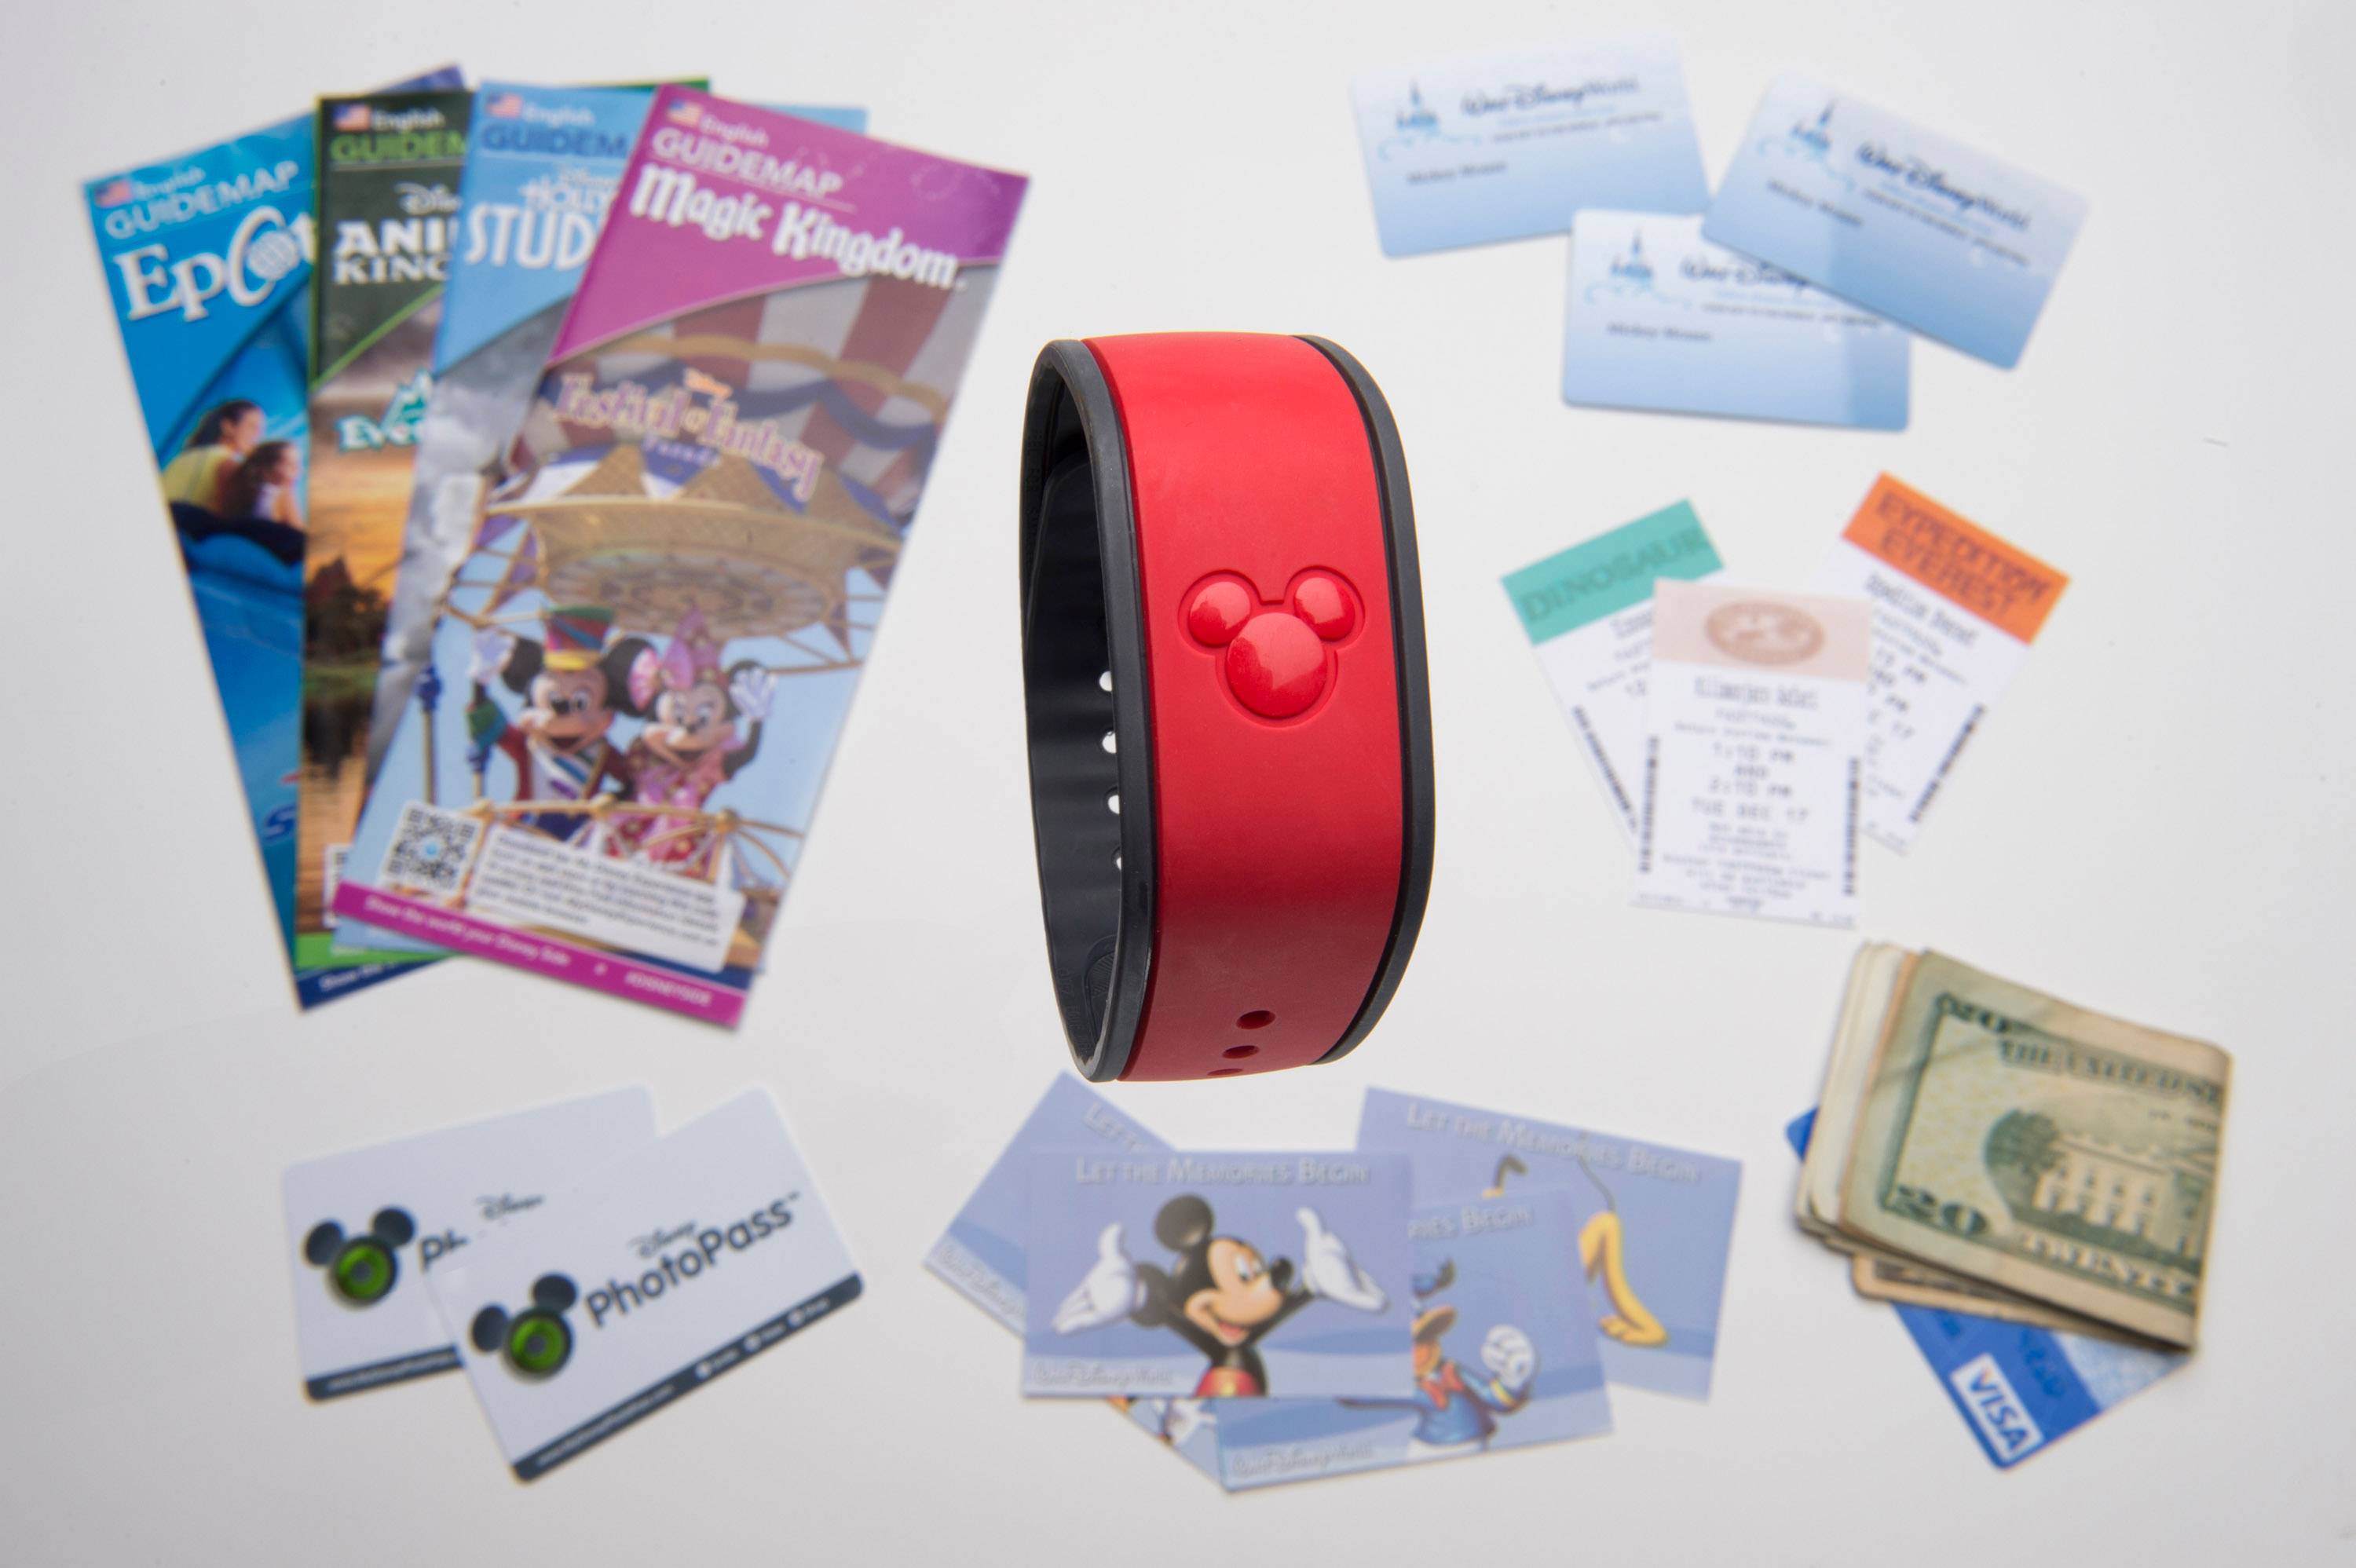 Disney's PhotoPass PhotoCD price to increase later this month